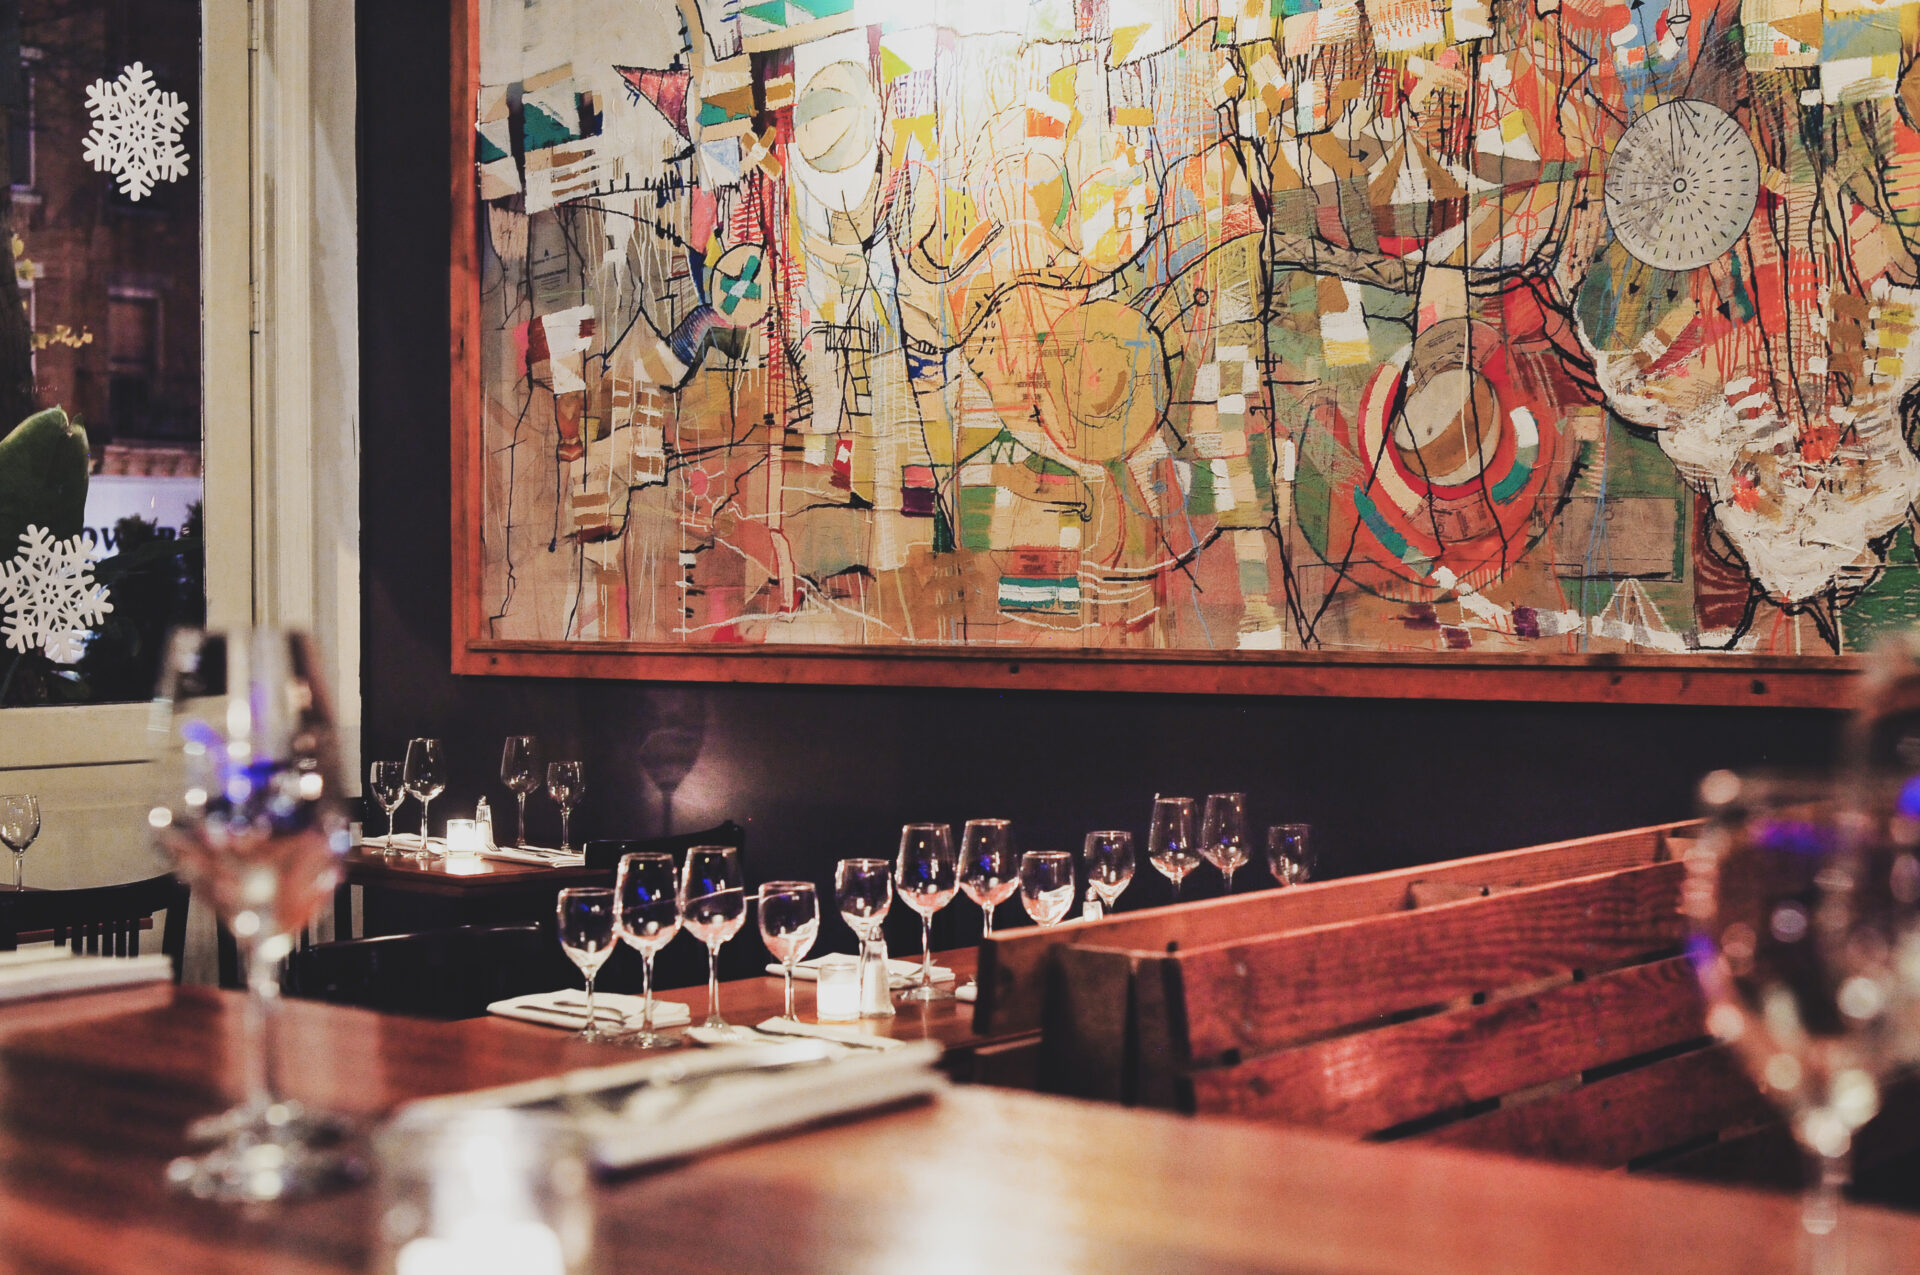 A table with wine glasses and a painting on the wall.